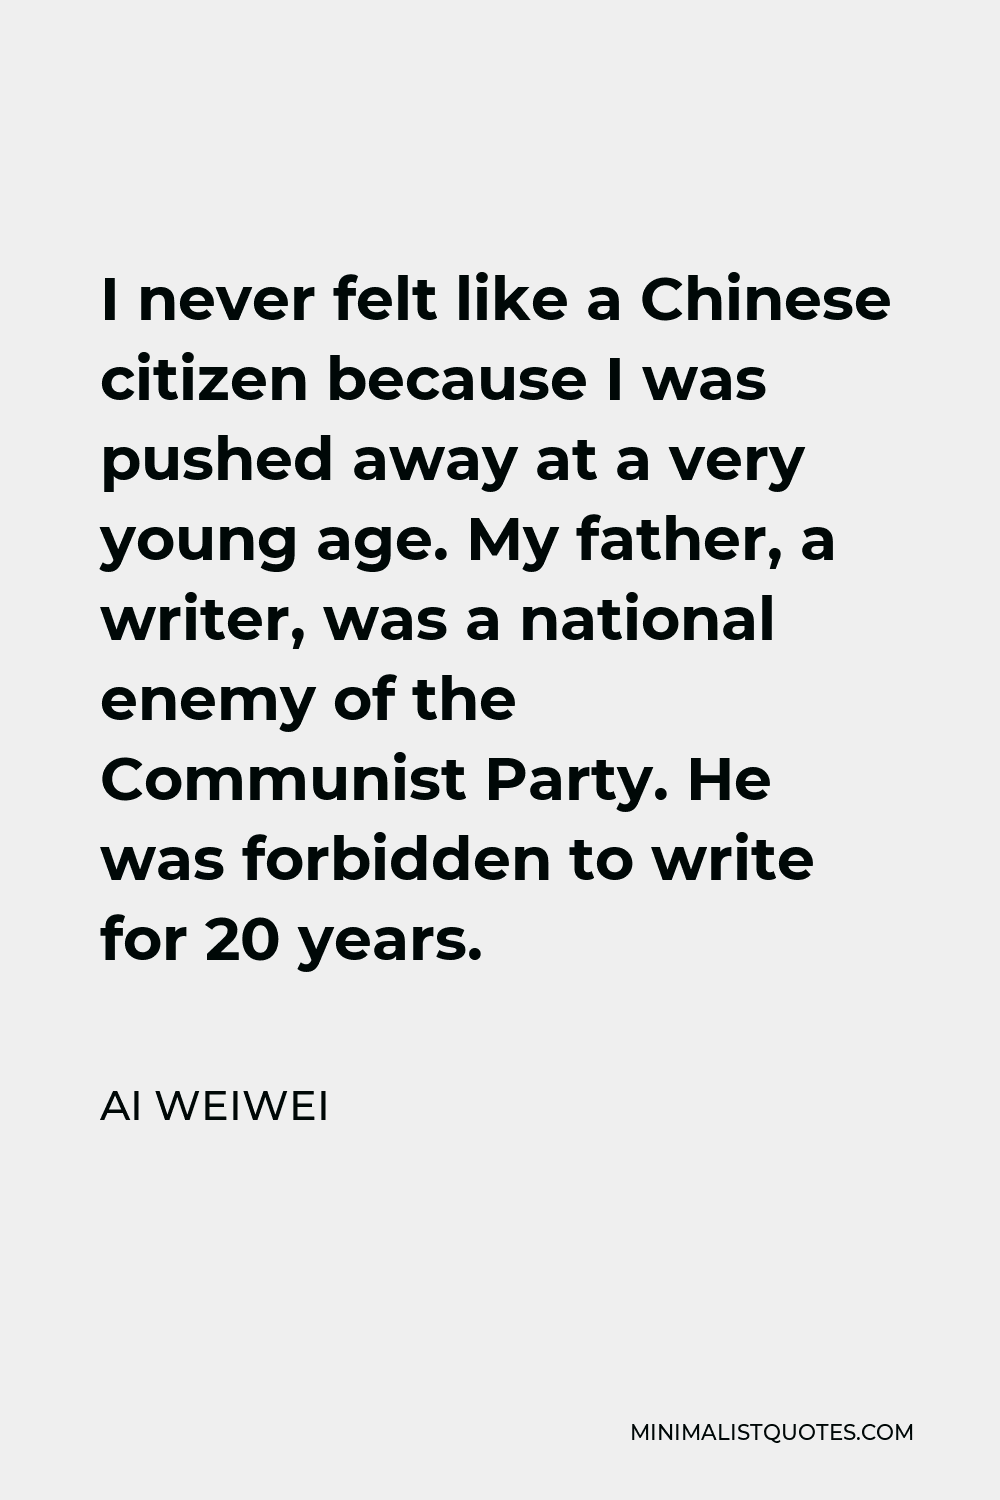 Ai Weiwei Quote - I never felt like a Chinese citizen because I was pushed away at a very young age. My father, a writer, was a national enemy of the Communist Party. He was forbidden to write for 20 years.